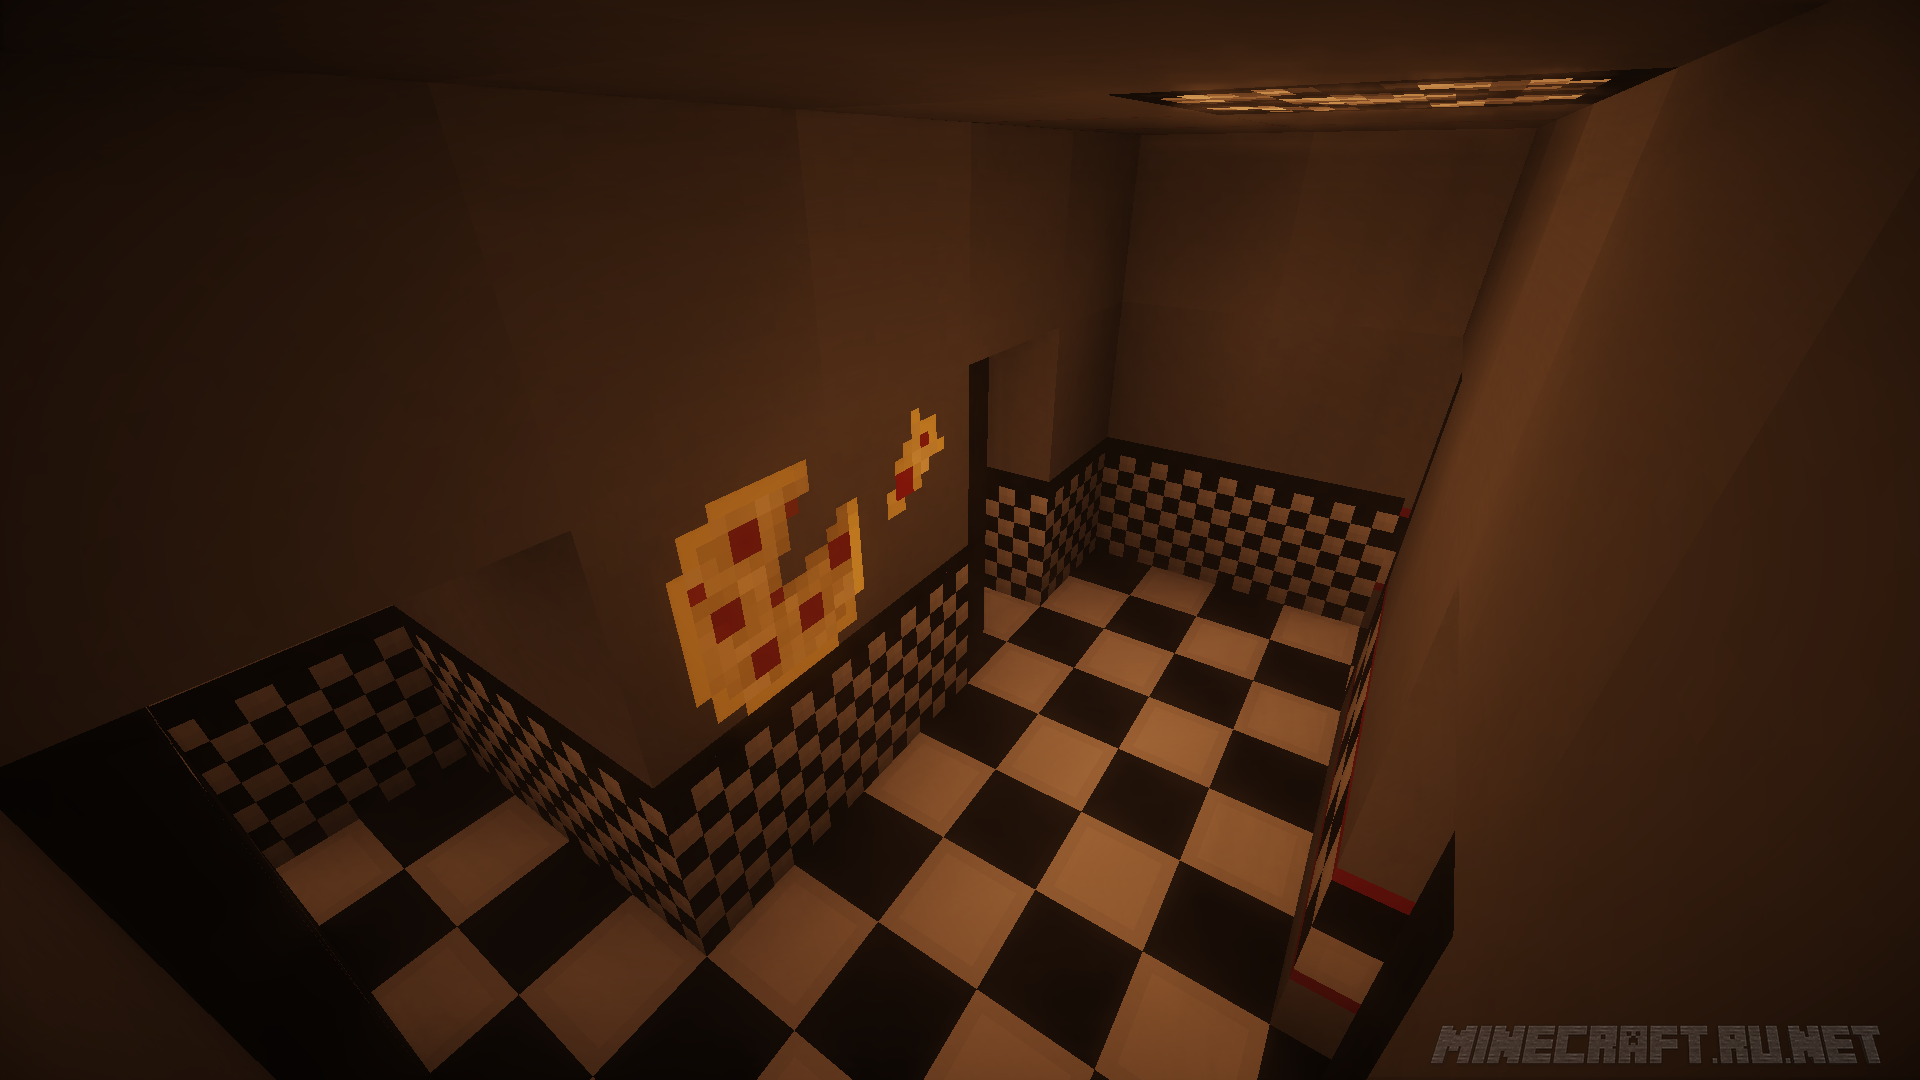 The Five Nights at Freddy's Texture Pack Minecraft Texture Pack